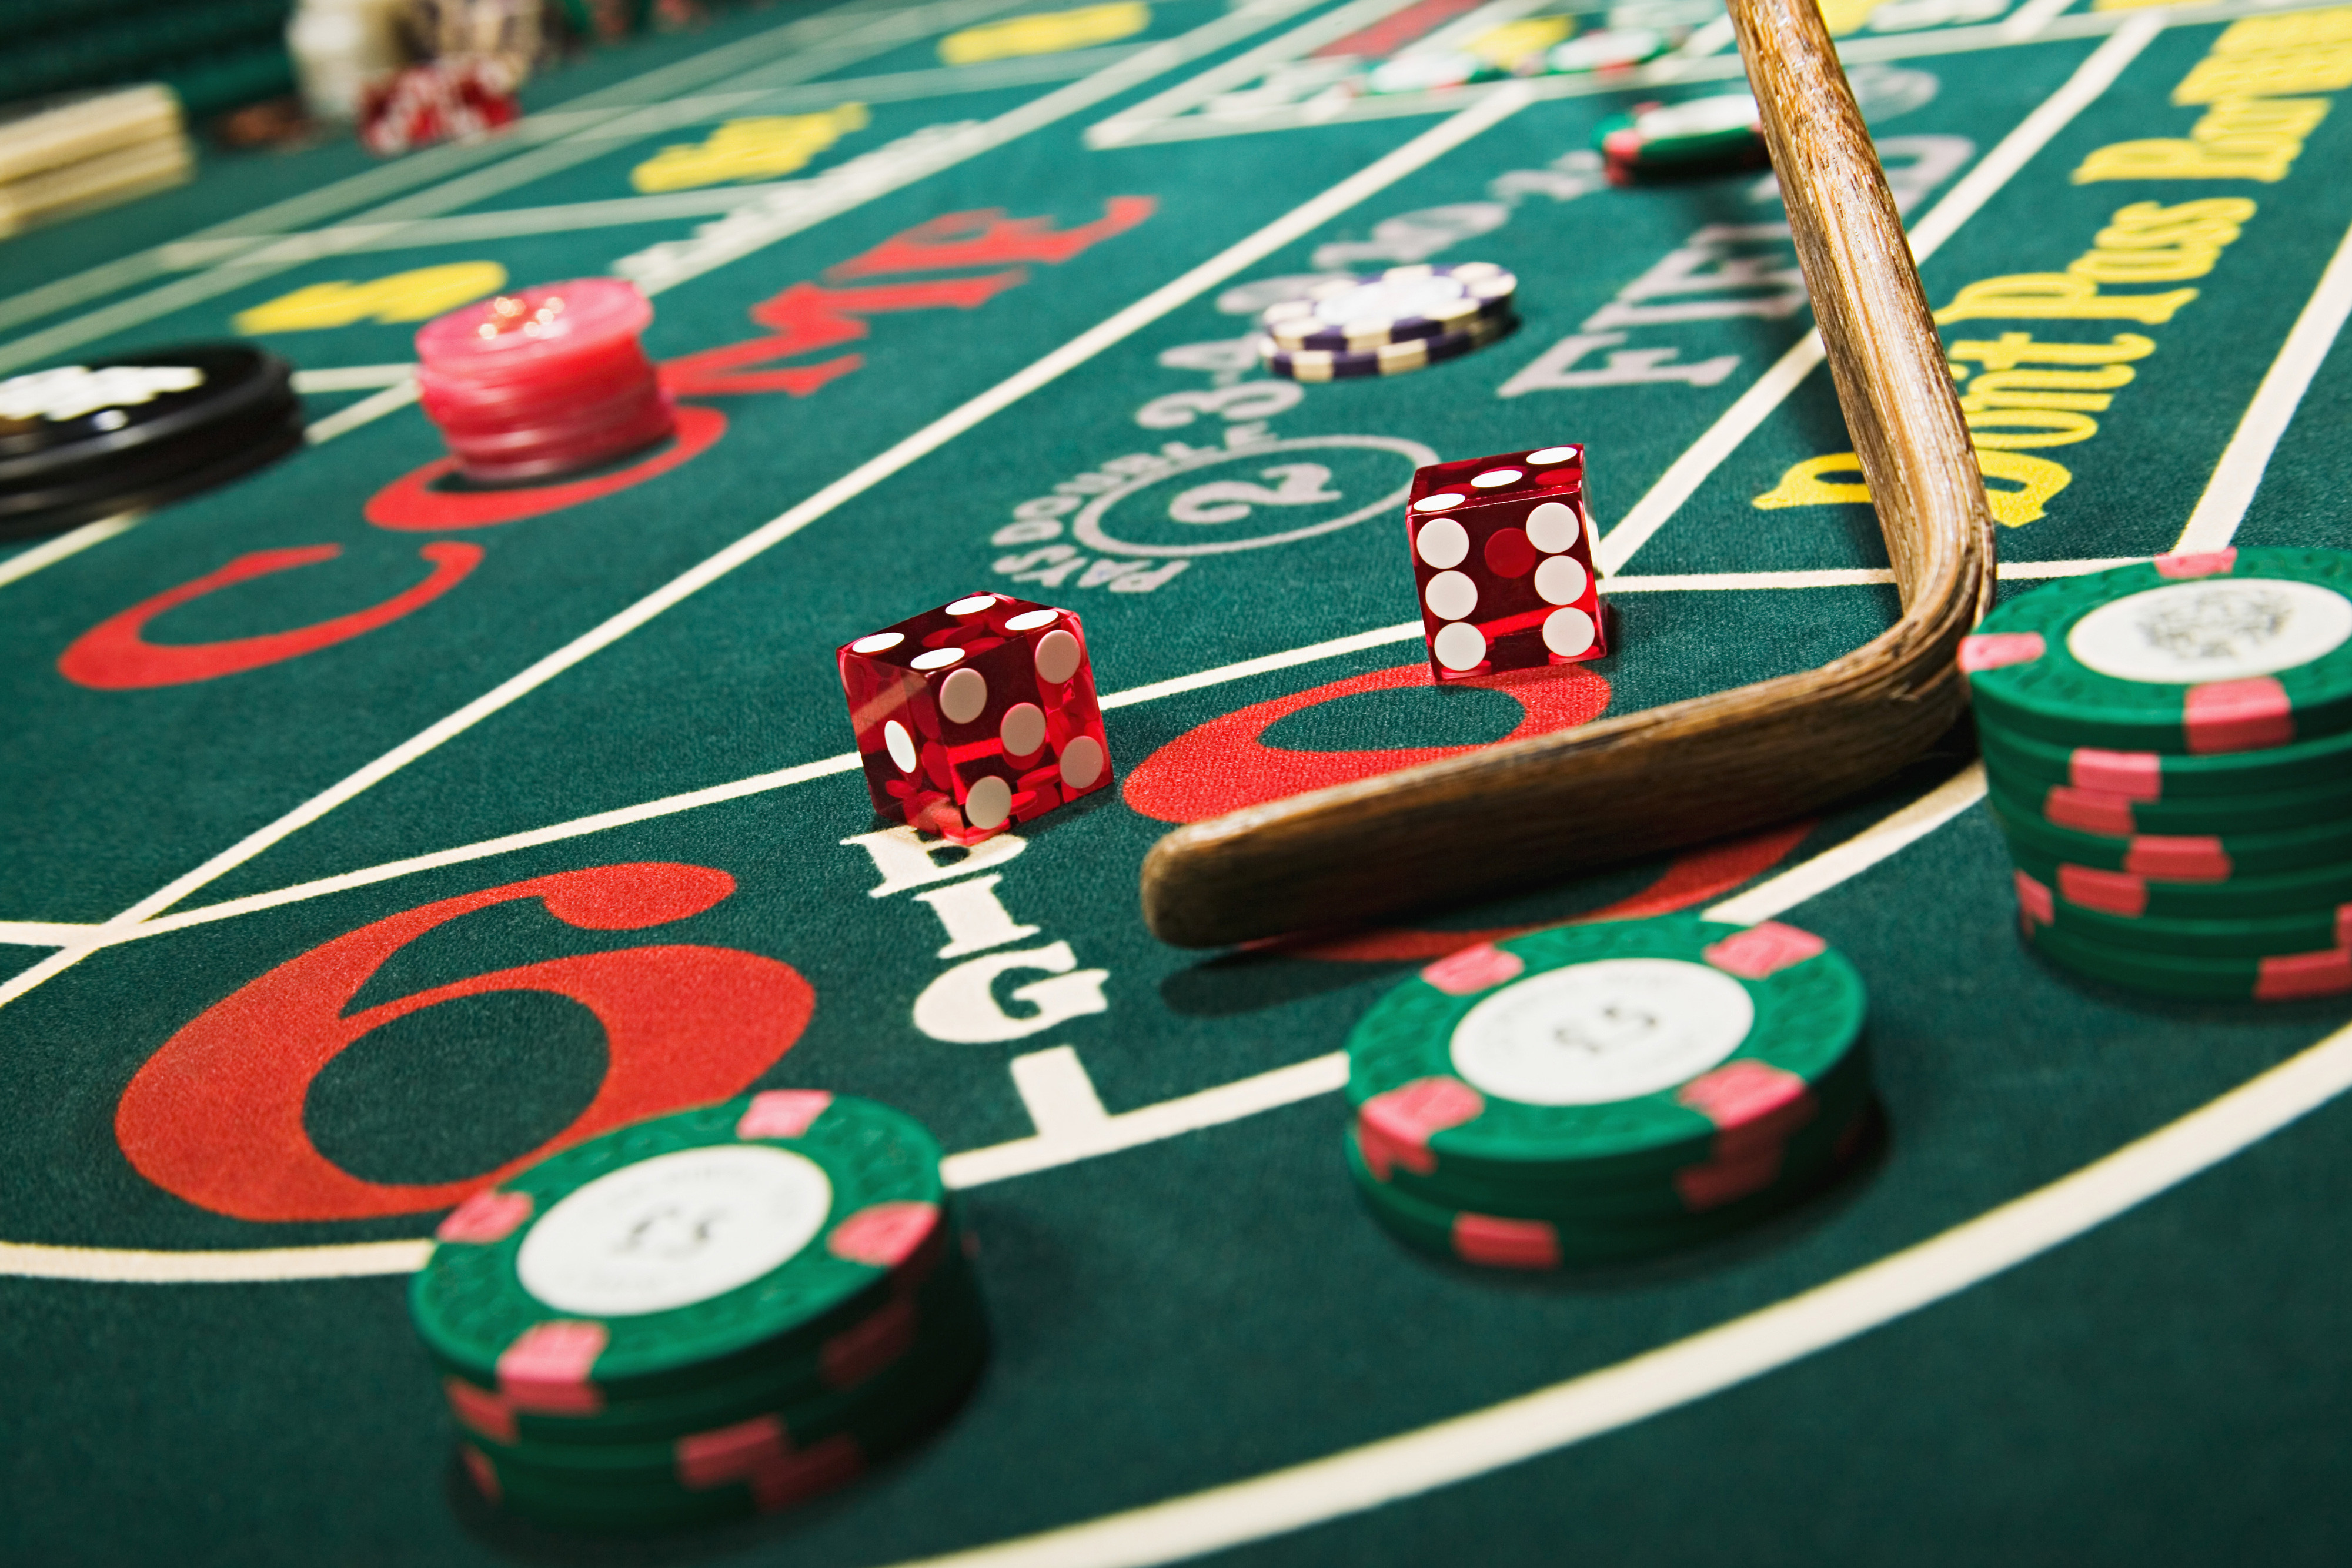 </p>
<p>A Beginners Guide to Navigating the Casino”/><span style=